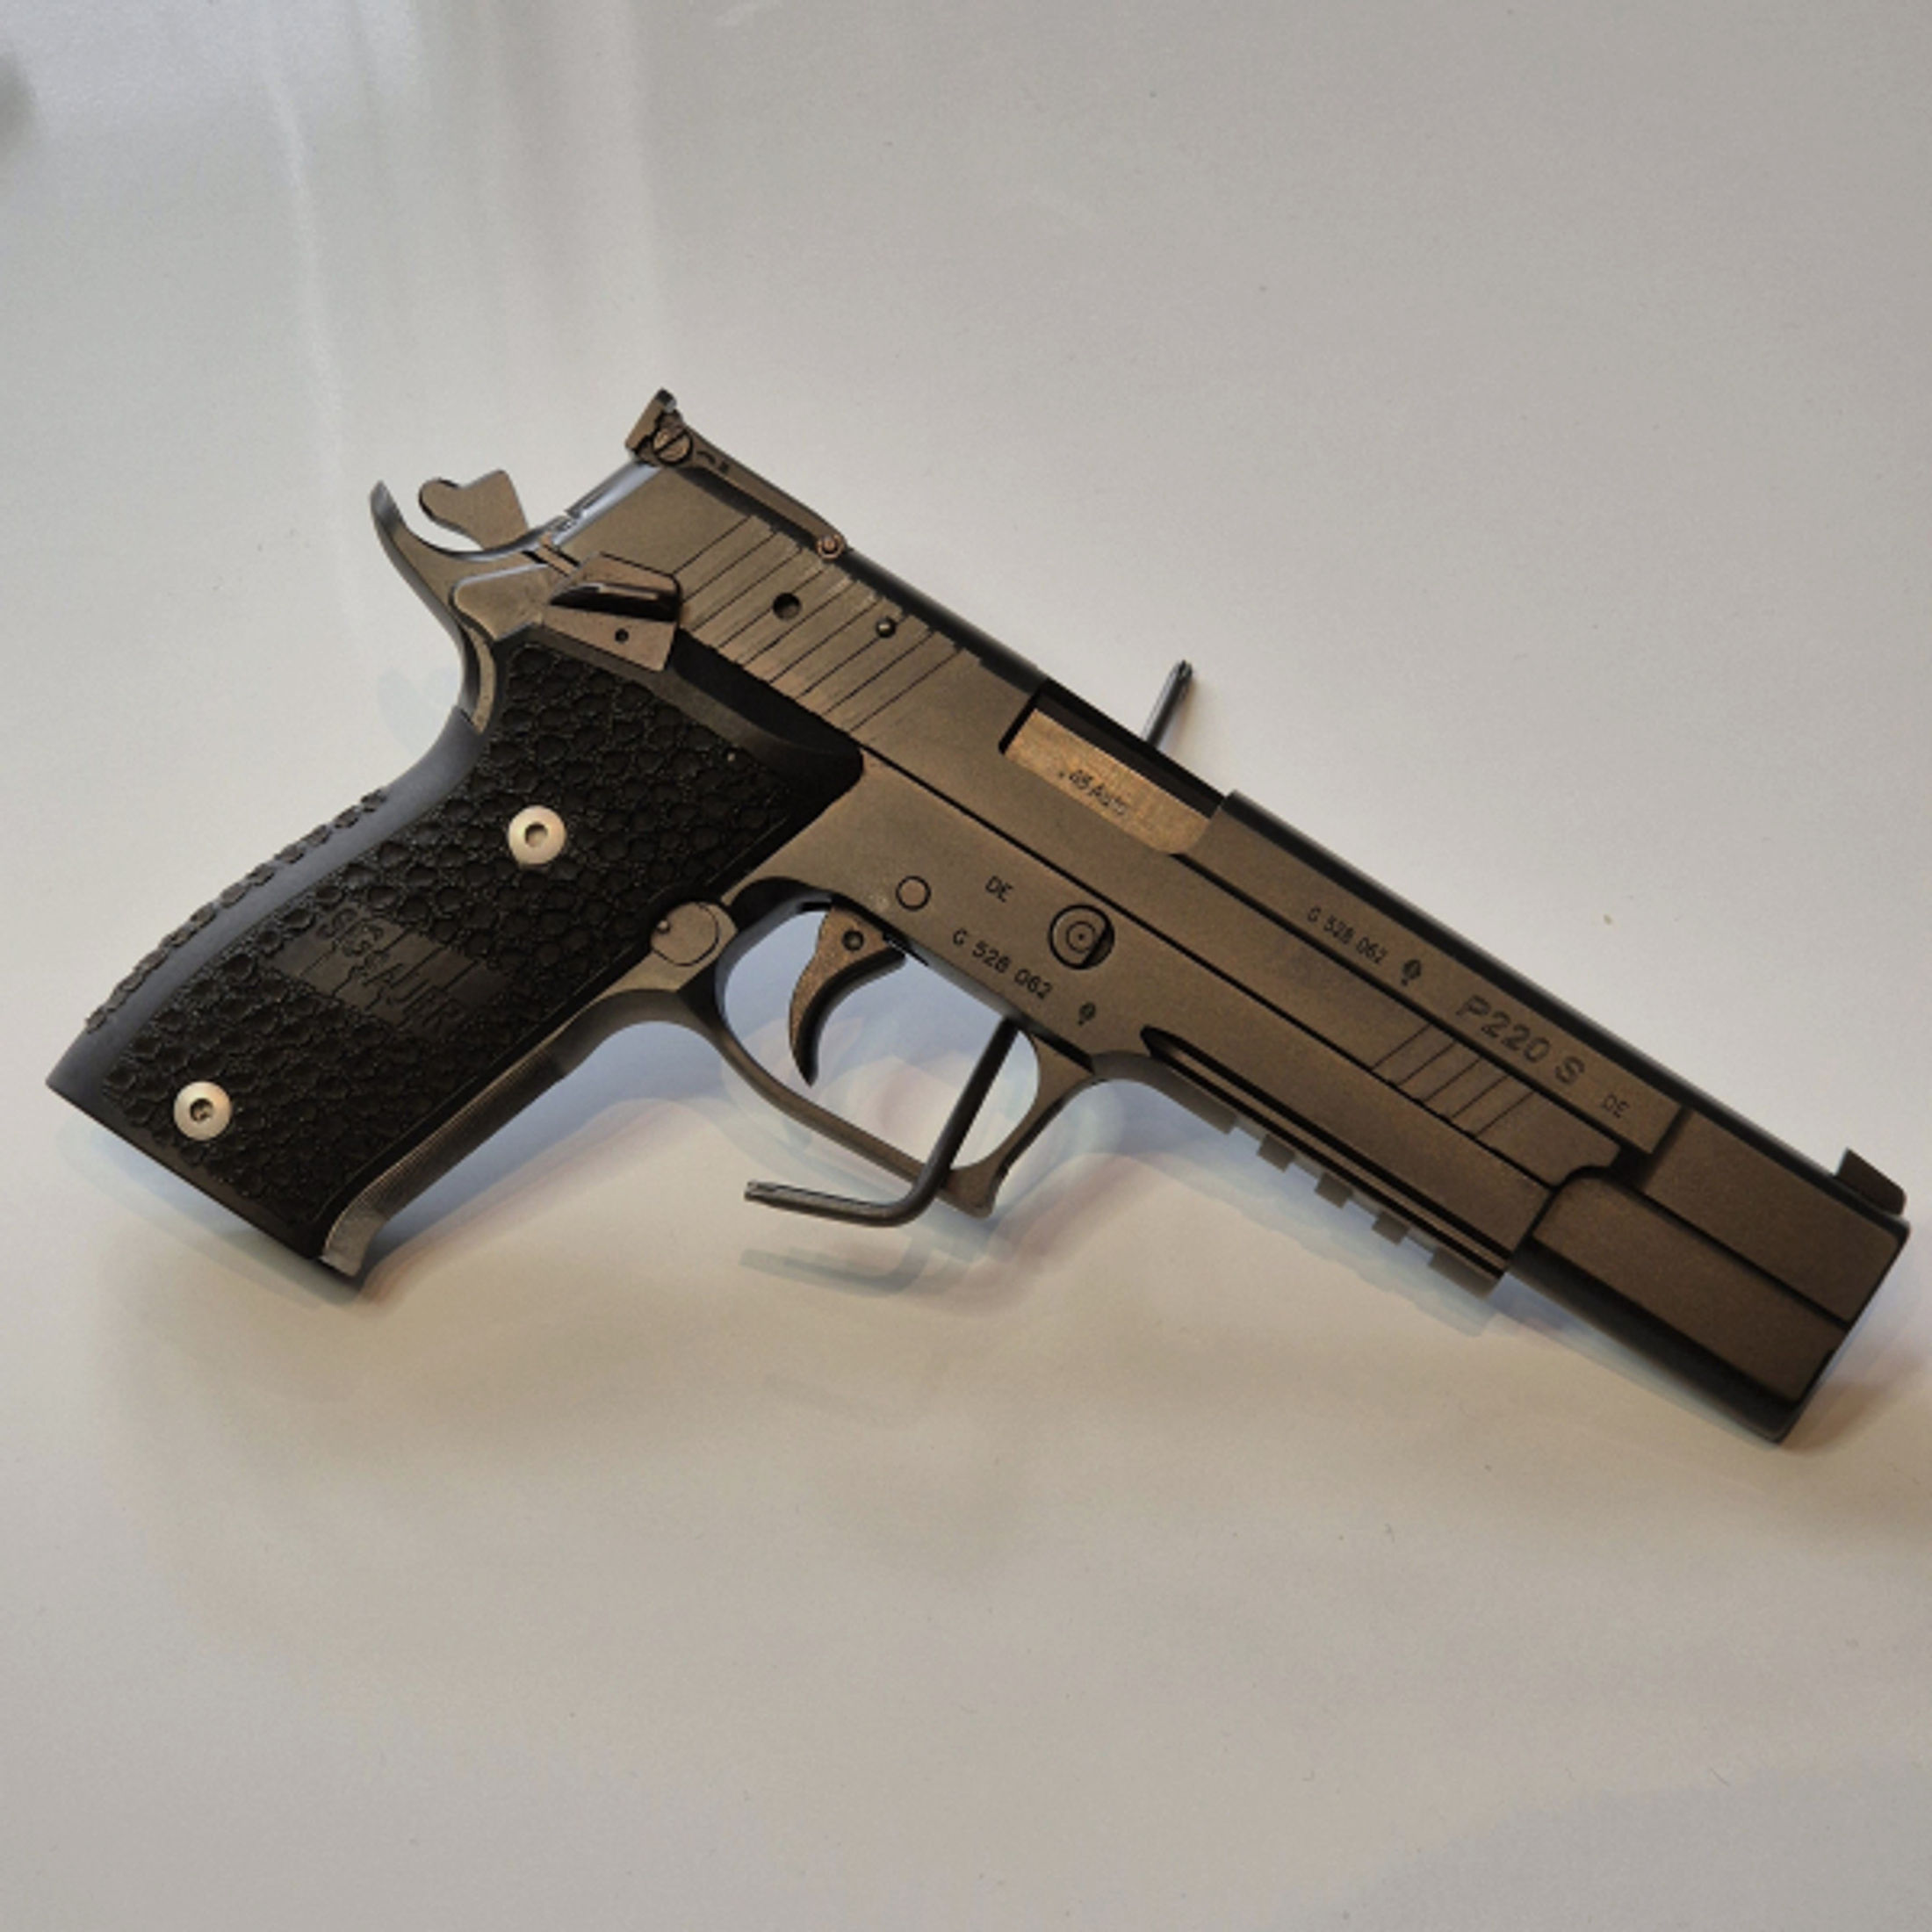 SIG Sauer P220 X6 .45 ACP Gen 1 made in Germany